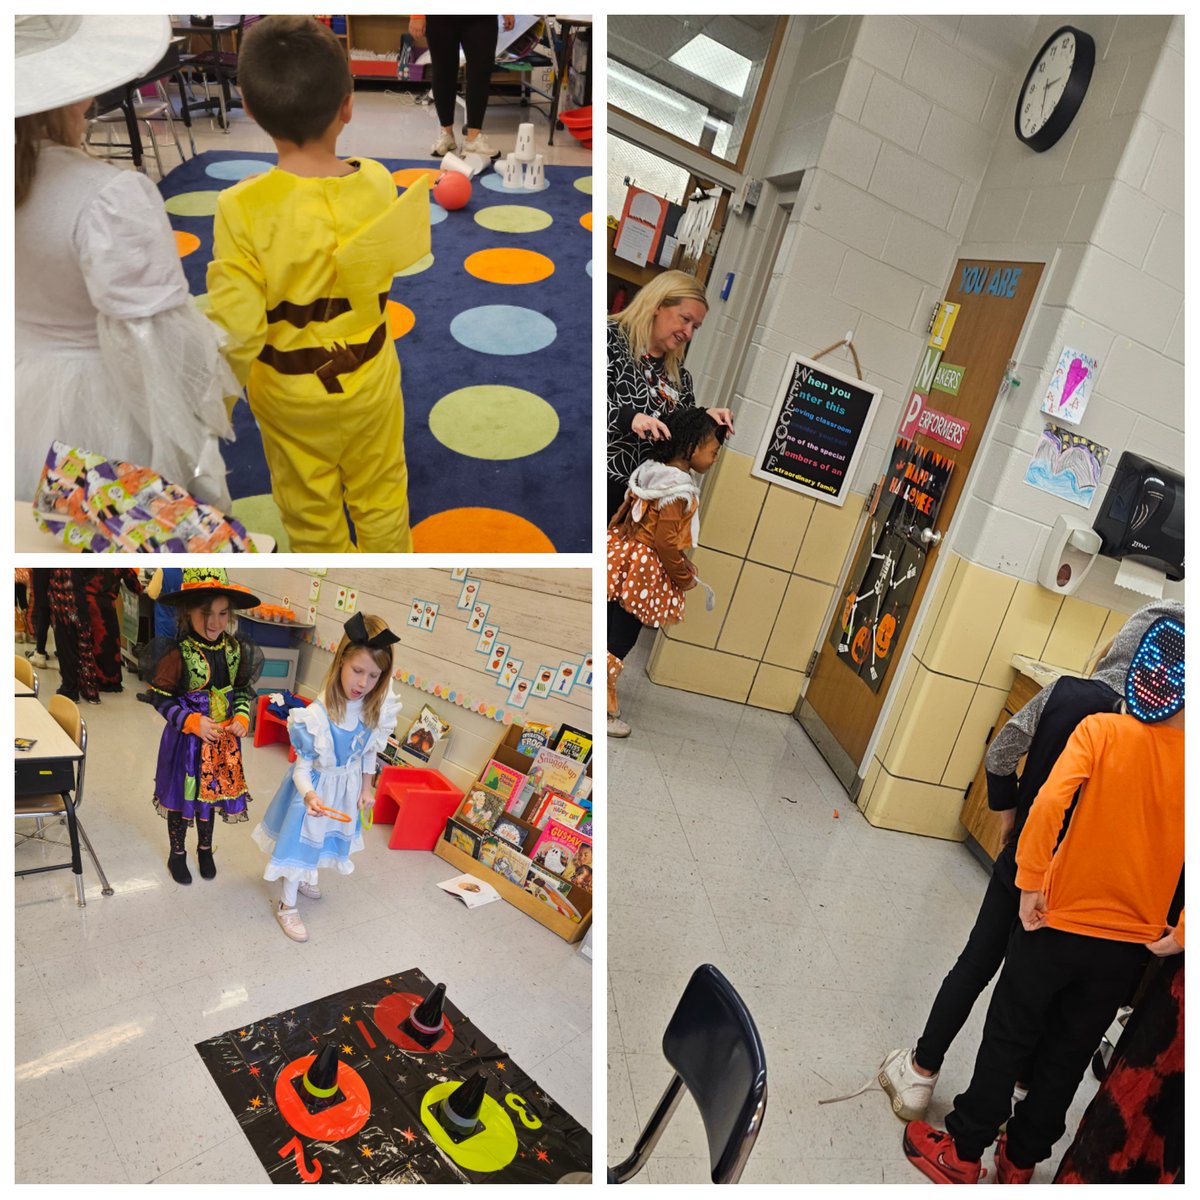 Happy Halloween from 1st grade 🎃 We had a spootacular time celebrating. Big thanks to all our patent volunteers! #kingsley58 #dg58pride